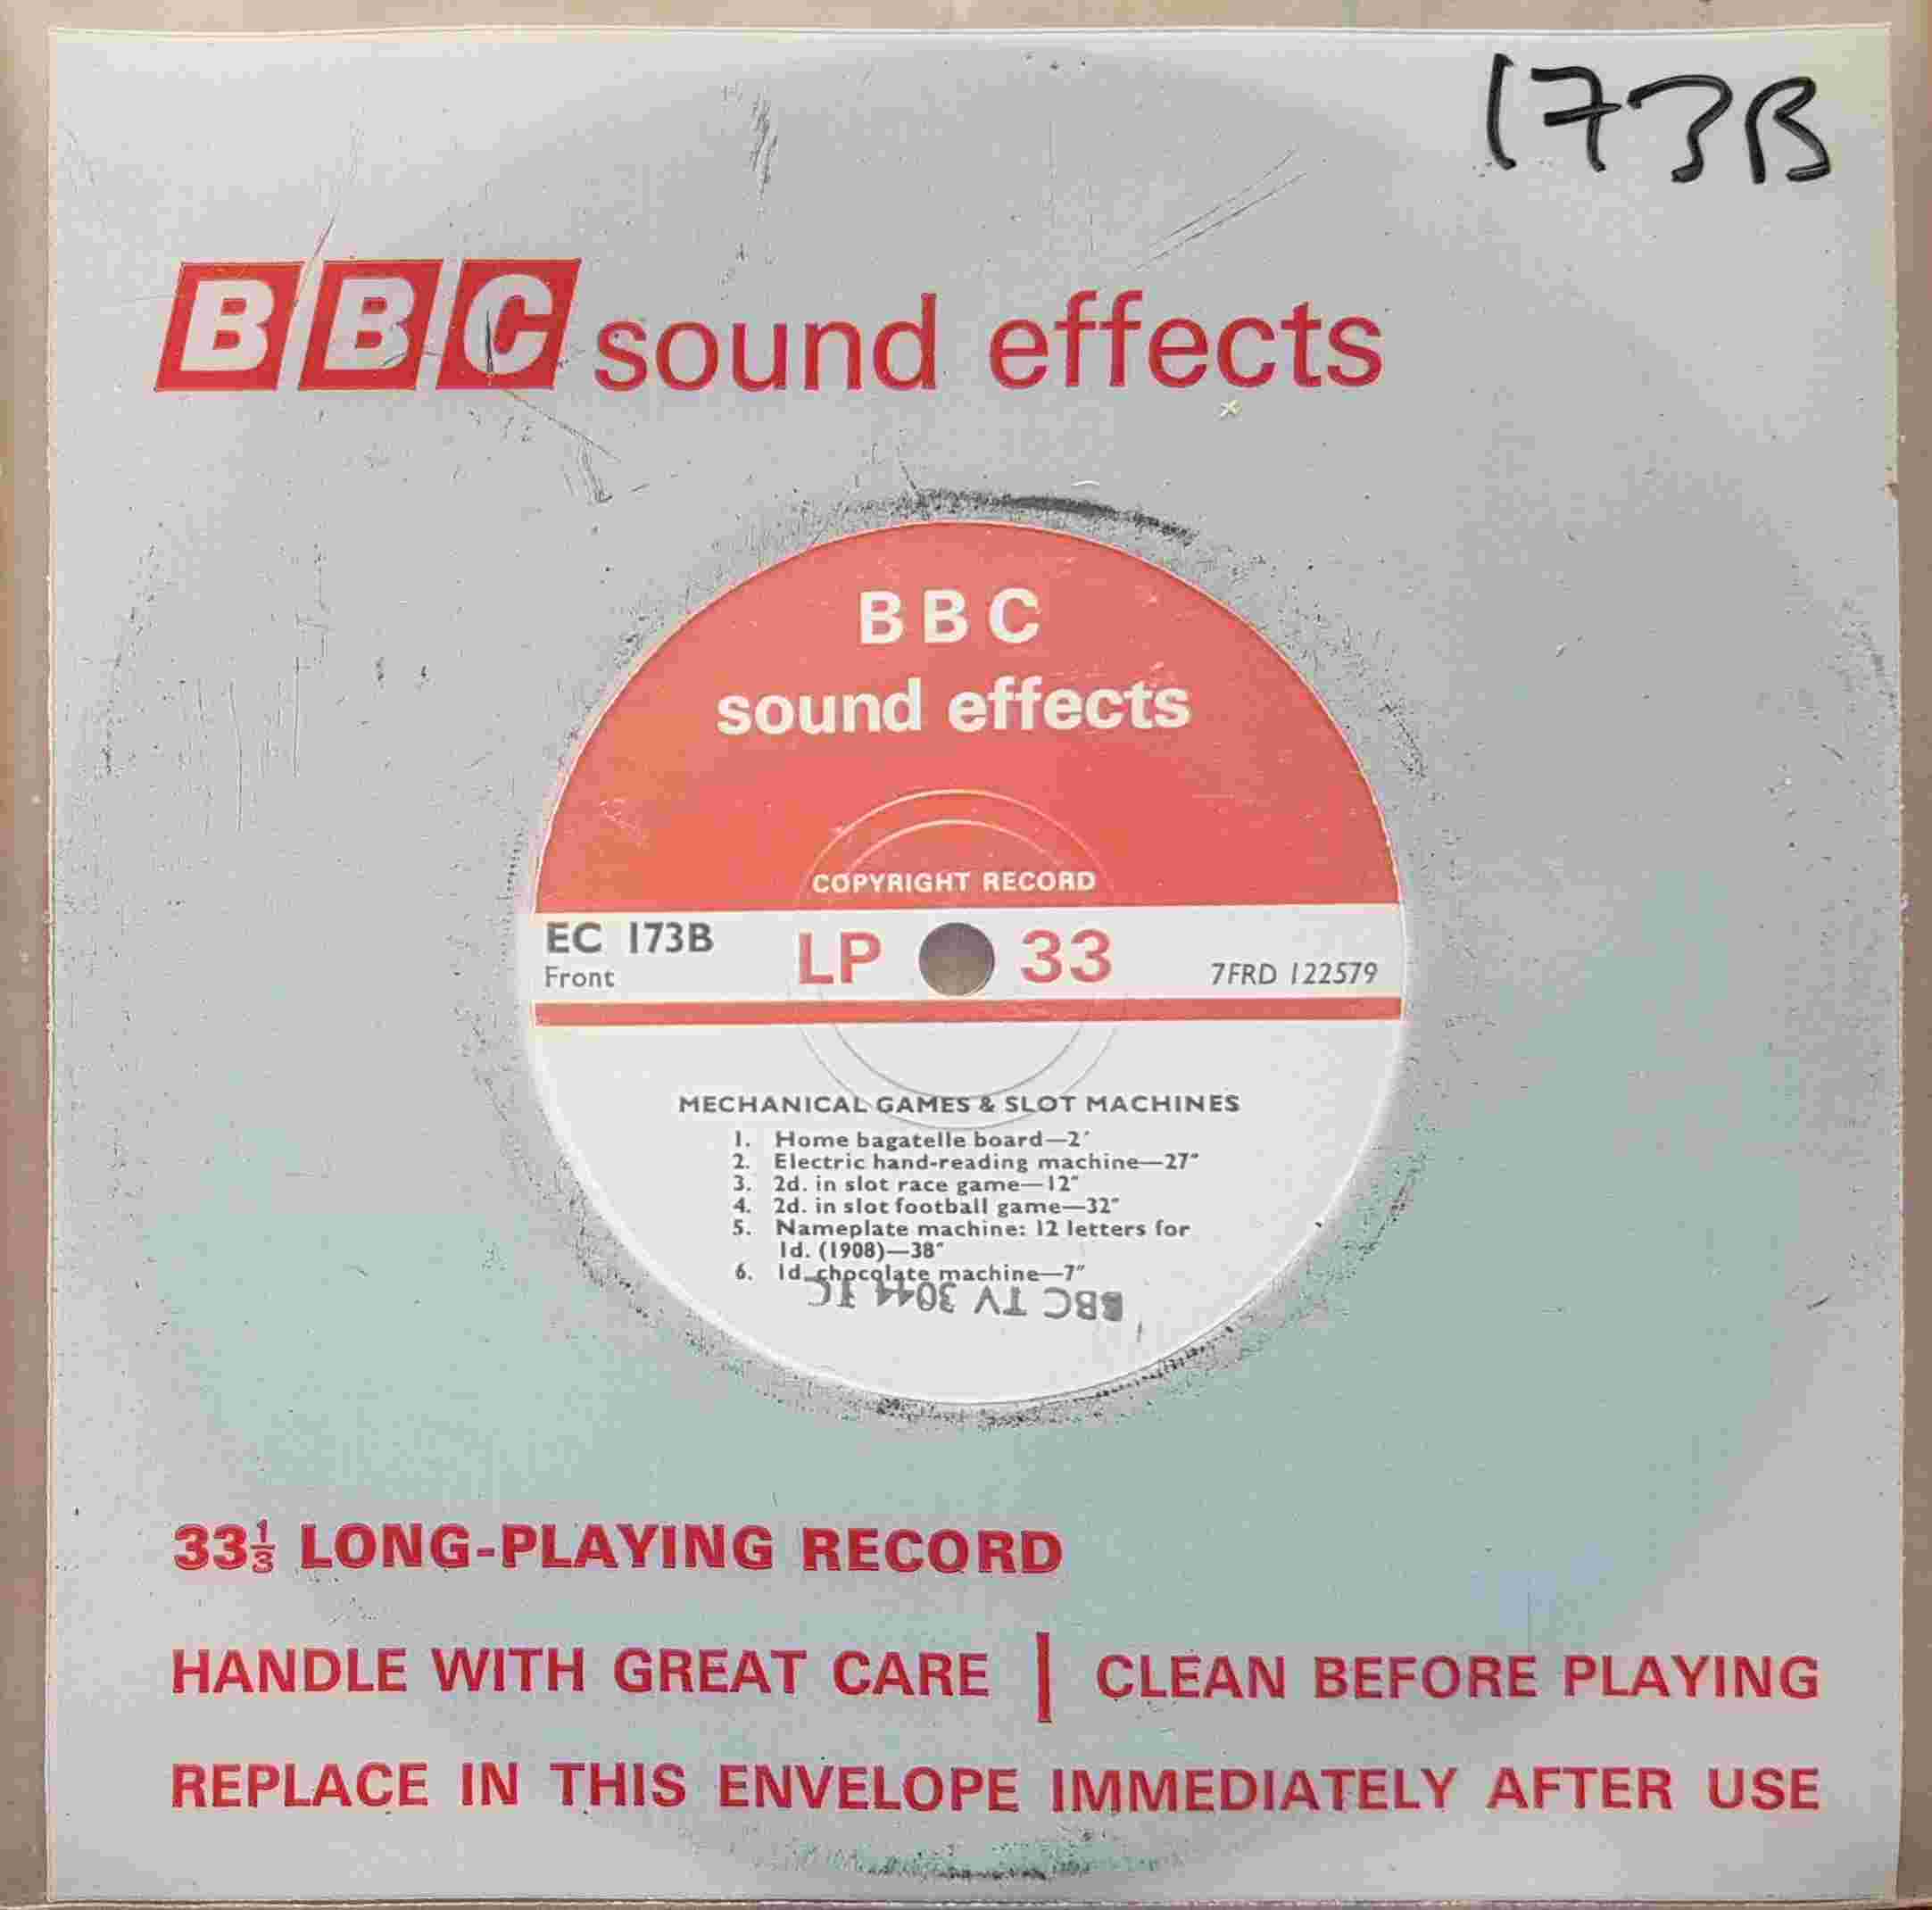 Picture of EC 173B Slot machines by artist Not registered from the BBC singles - Records and Tapes library